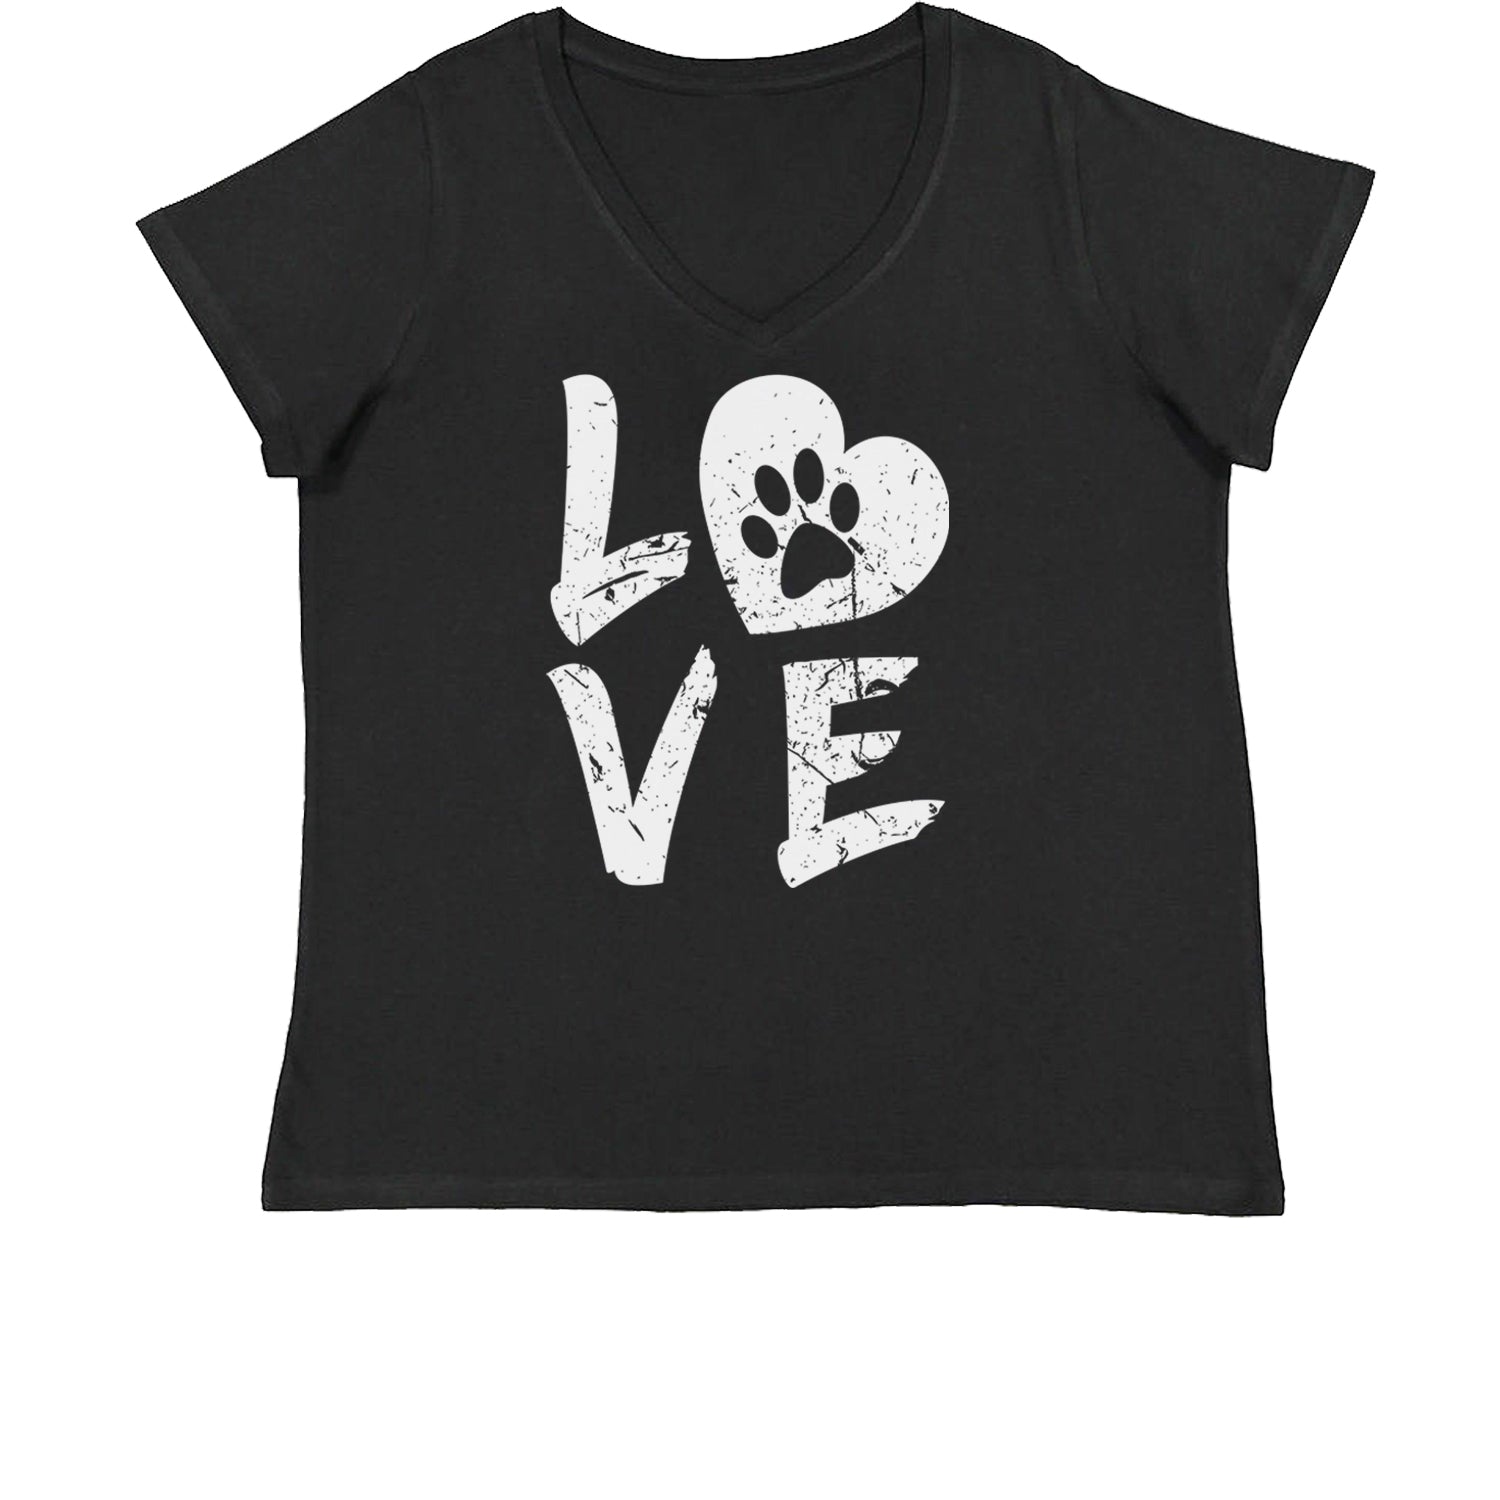 I Love My Dog Paw Print Womens Plus Size V-Neck T-shirt dog, doggie, heart, love, lover, paw, print, puppy by Expression Tees